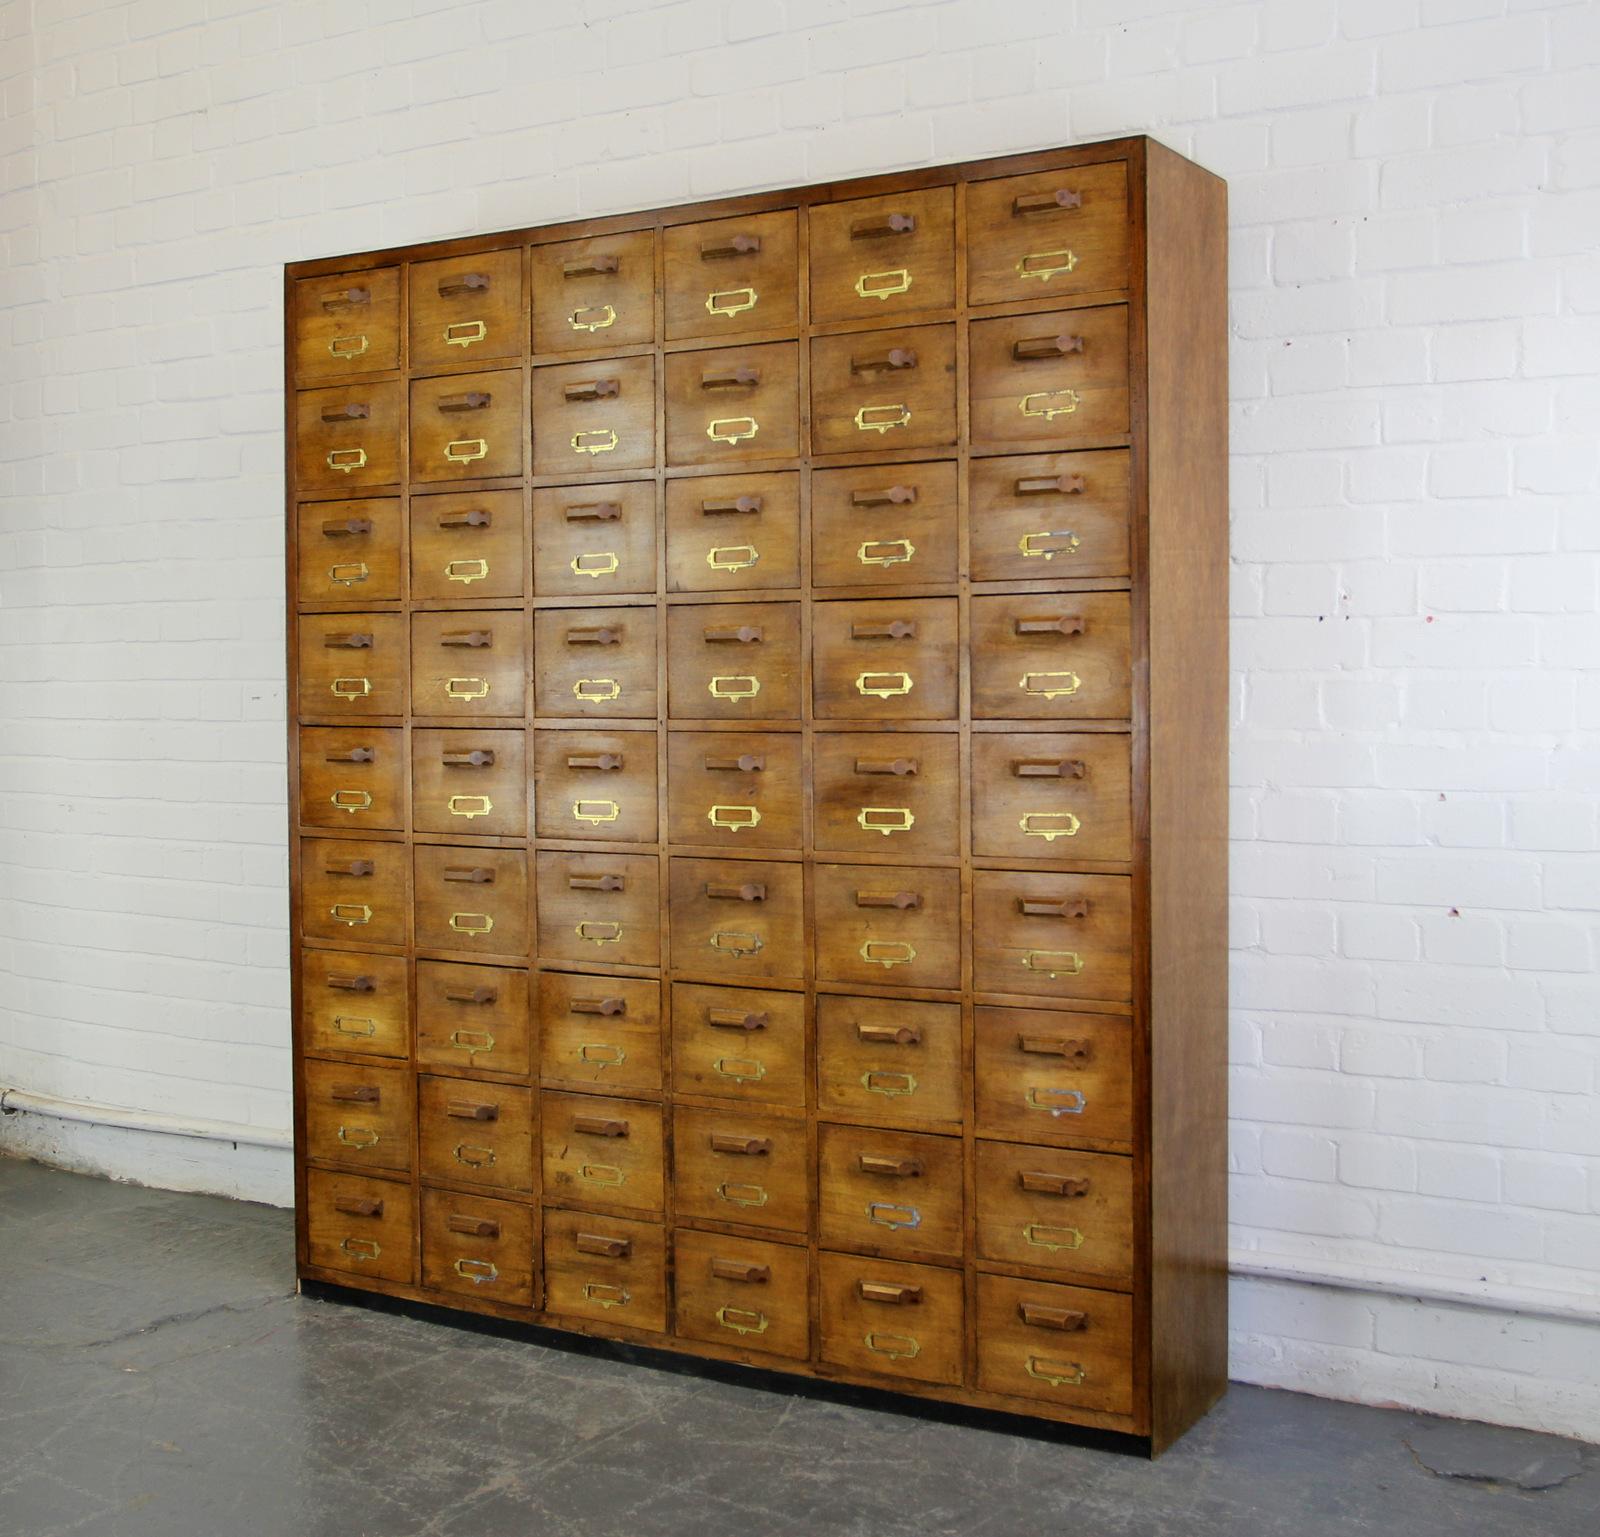 Large Bank Of French Haberdashery drawers, circa 1940s.

- Solid pine drawers
- Geometric Pine handles
- Brass card holders
- 54 identical drawers
- French, circa 1940s
- Measures: 152cm wide x 173cm tall x 31cm deep.
- Each drawer measures